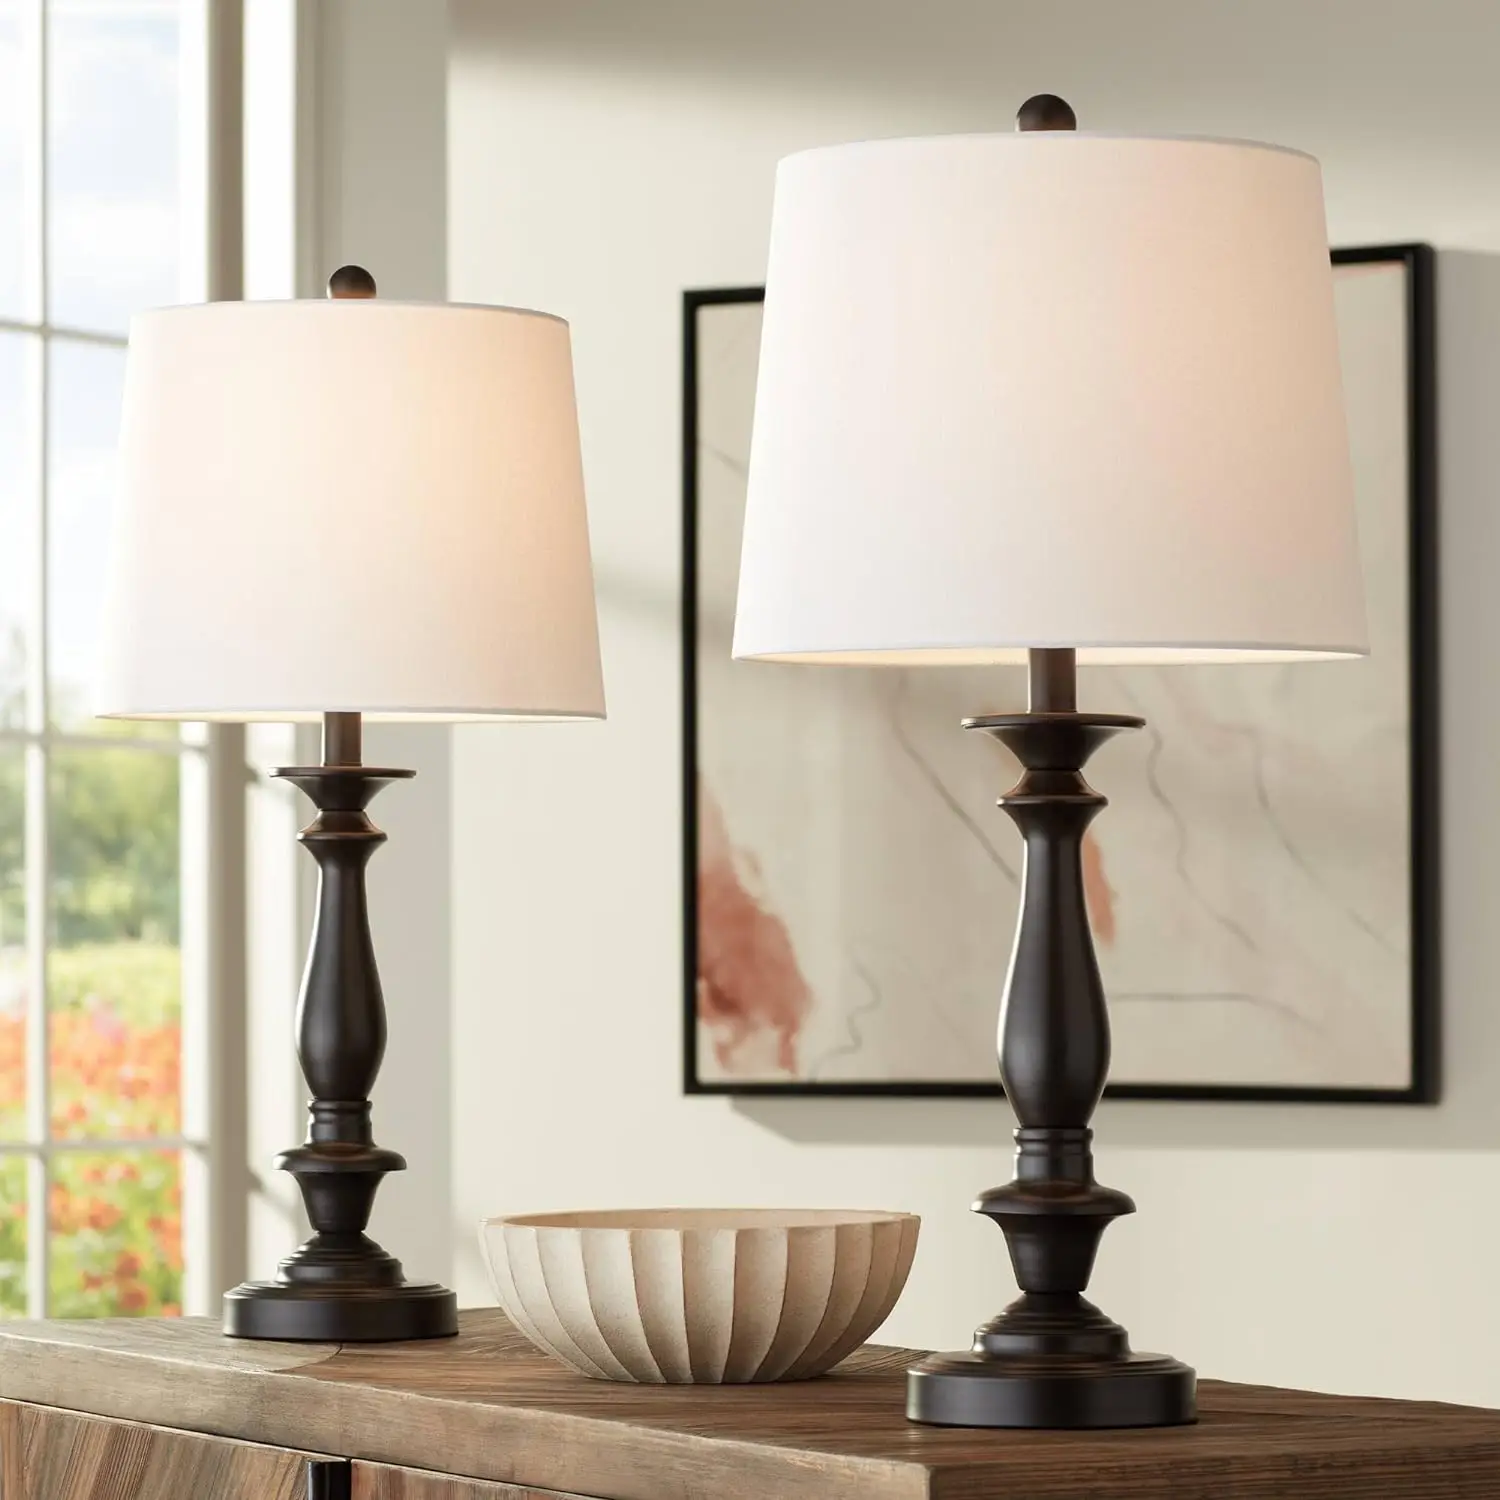 

Percy Traditional Table Lamps 26" Tall Set of 2 Dark Bronze Brown Metal Candlestick White Tapered Drum Shade for Bedroom Liv Lig